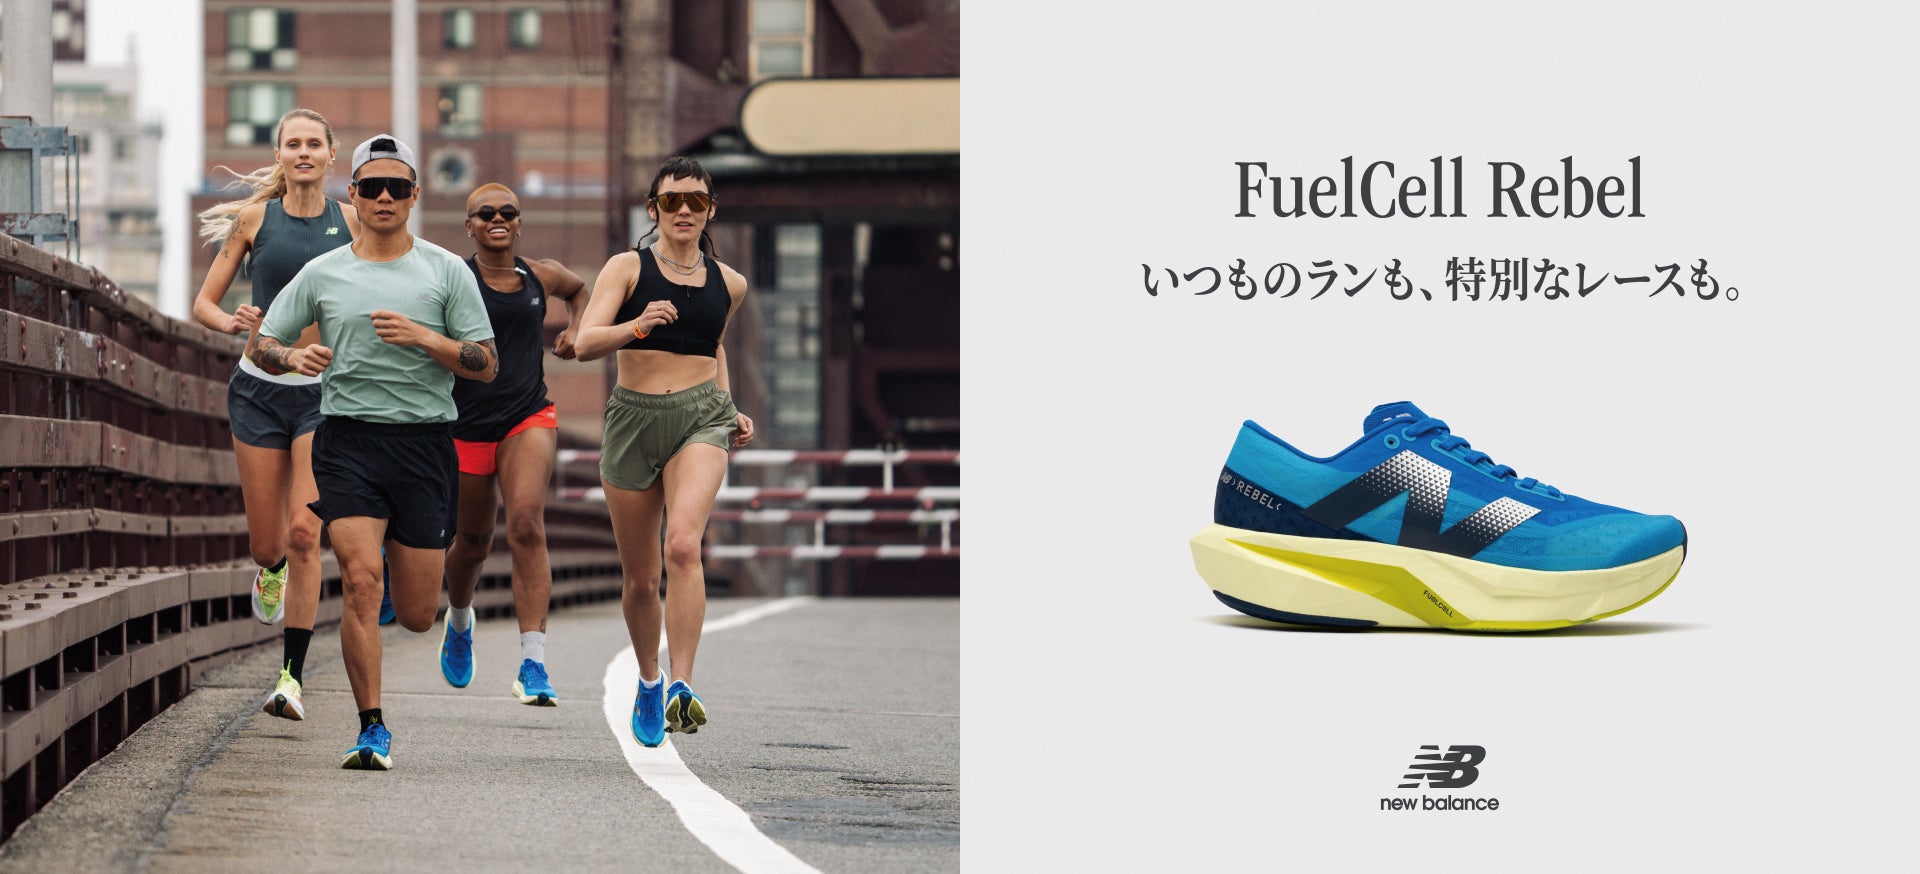 FuelCell Rebel For your everyday runs and special races.